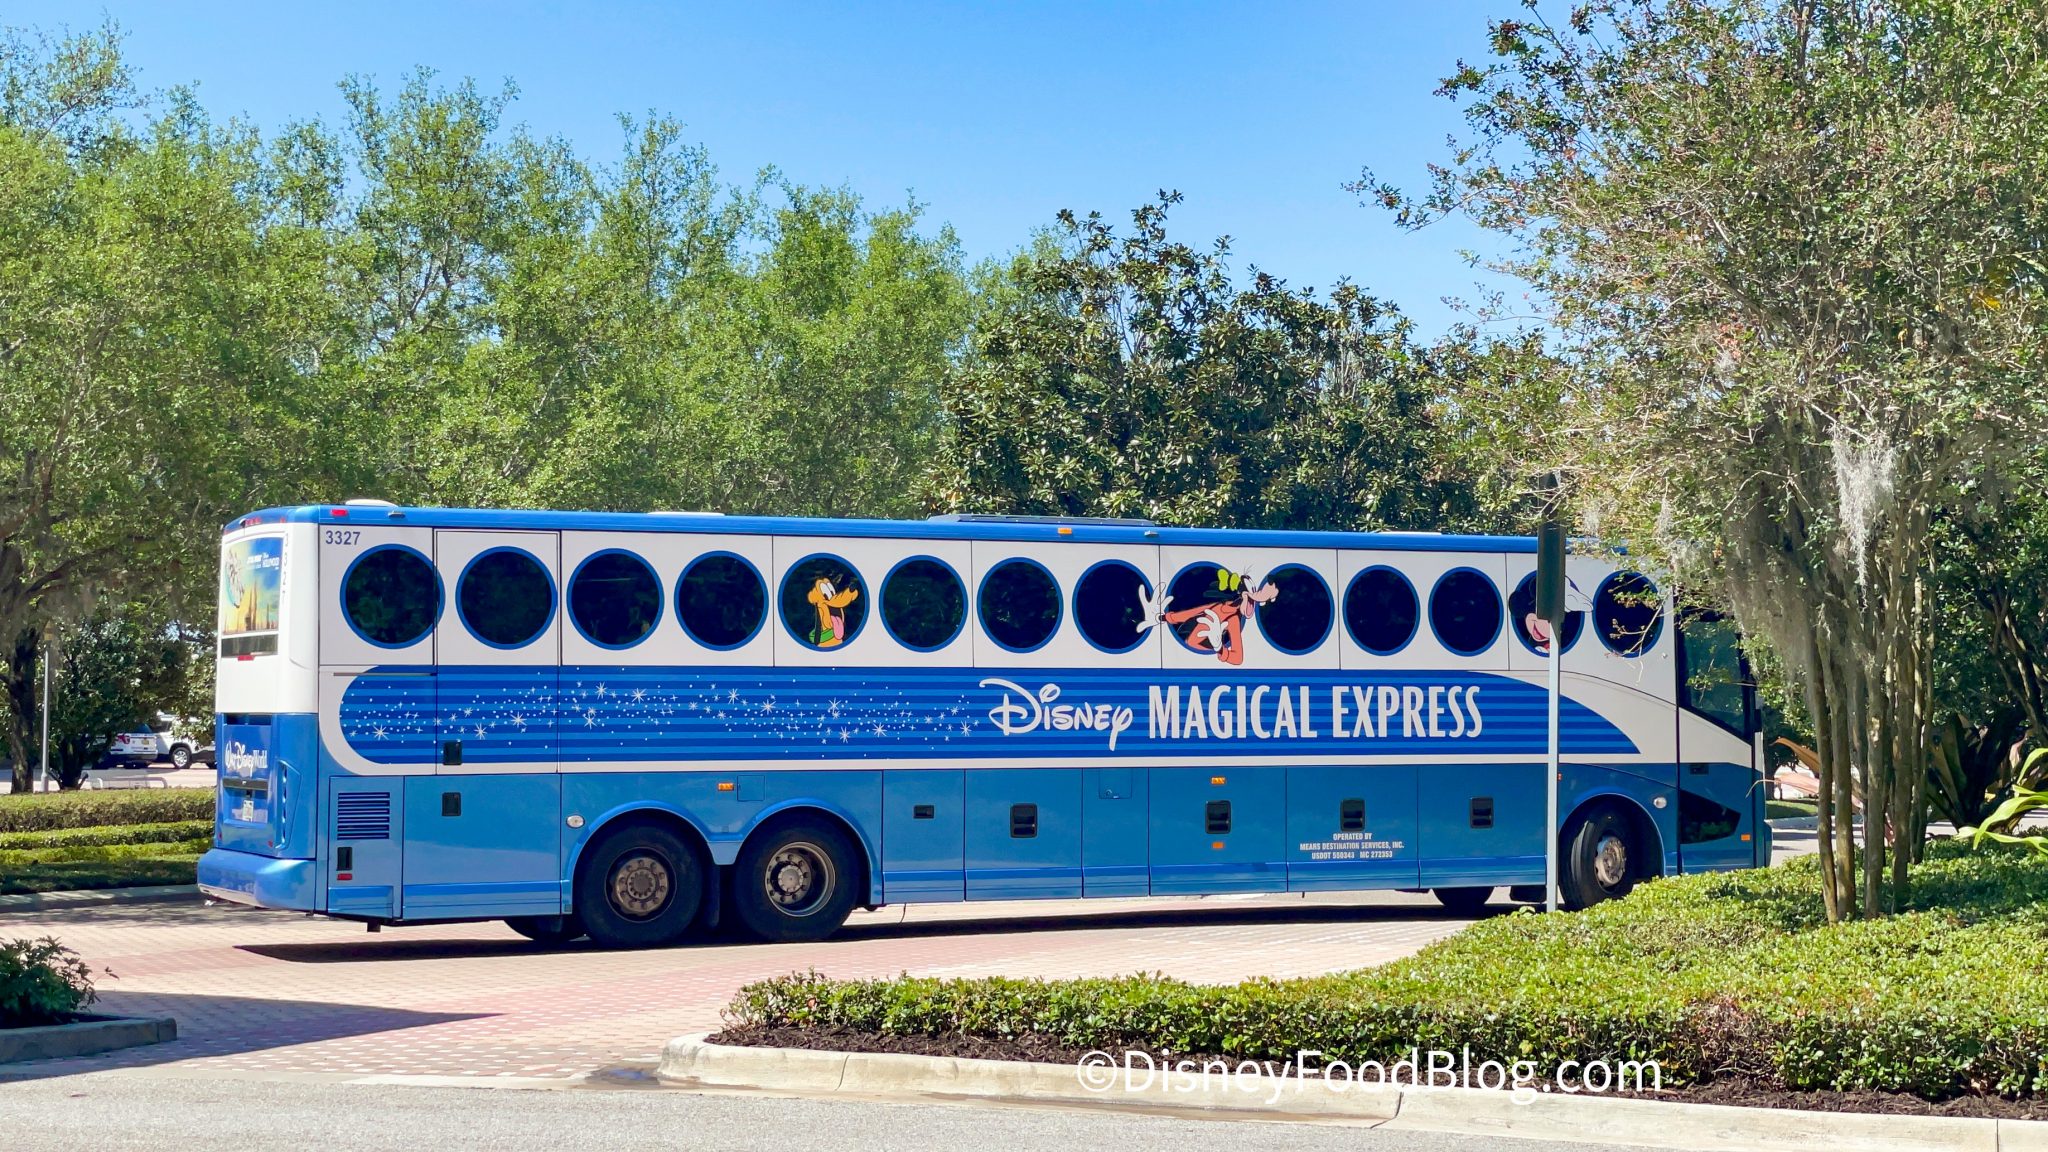 Which Service Will YOU Use Once Disney’s Magical Express is Gone?! Our Readers Weigh In!